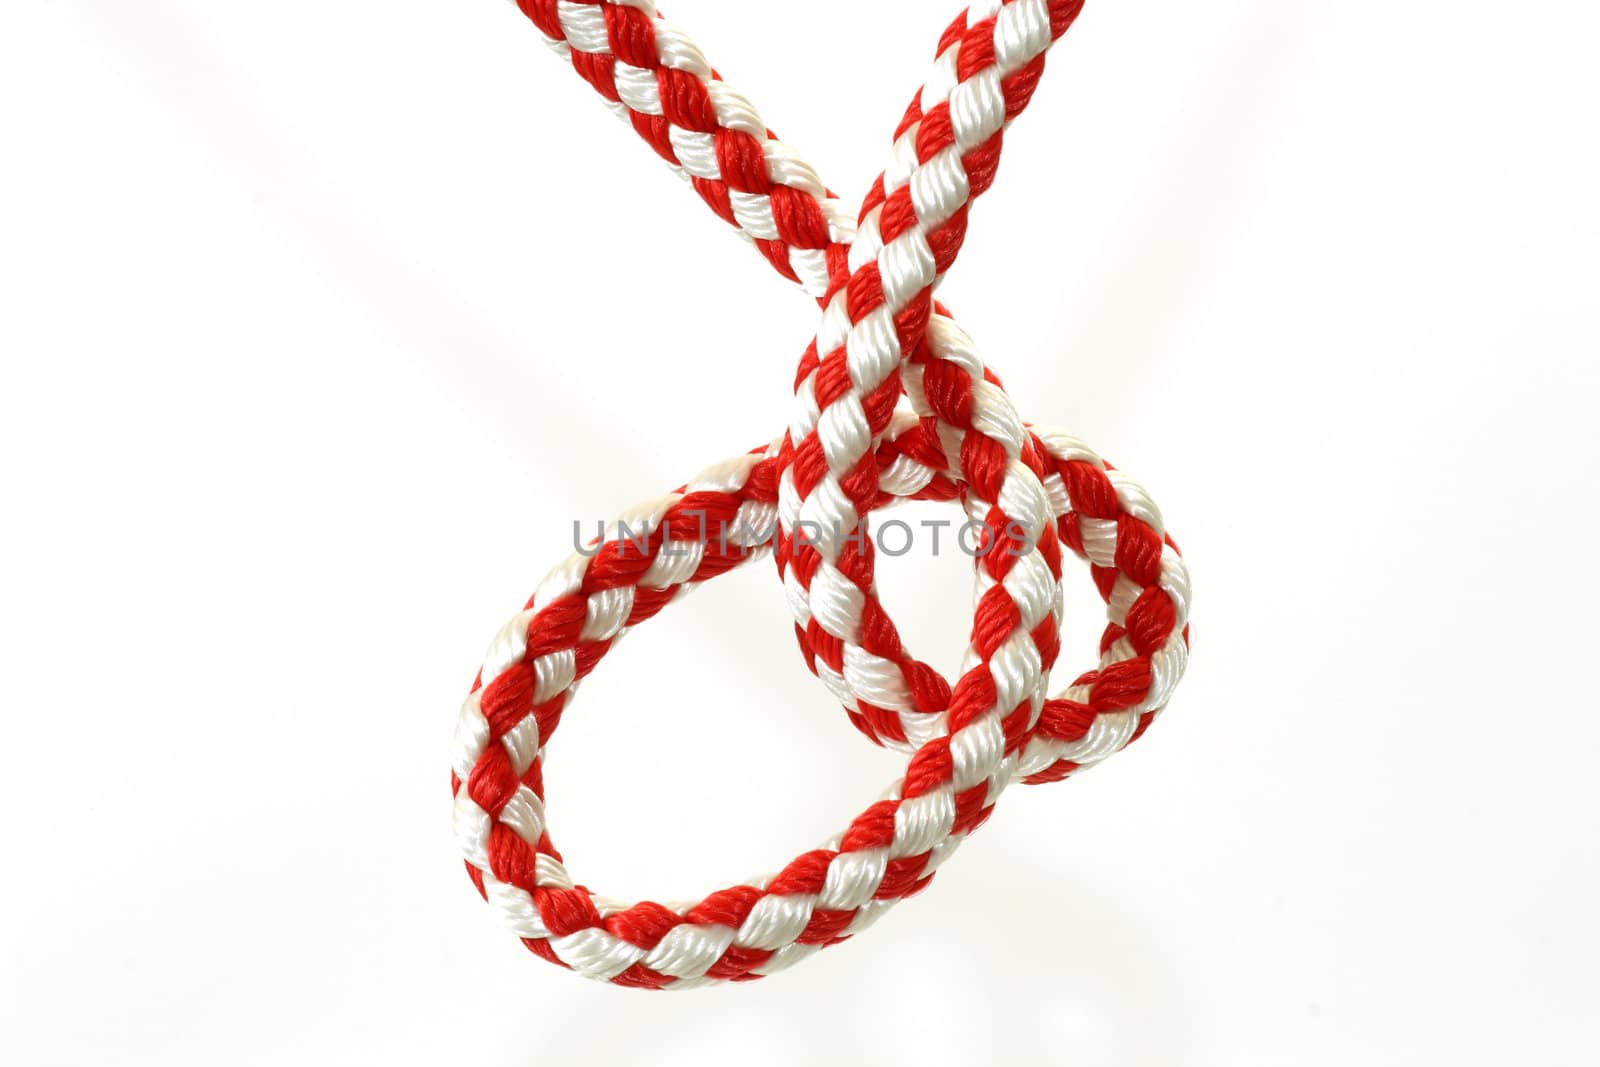 Rope with knot close up. Isolated on white background.